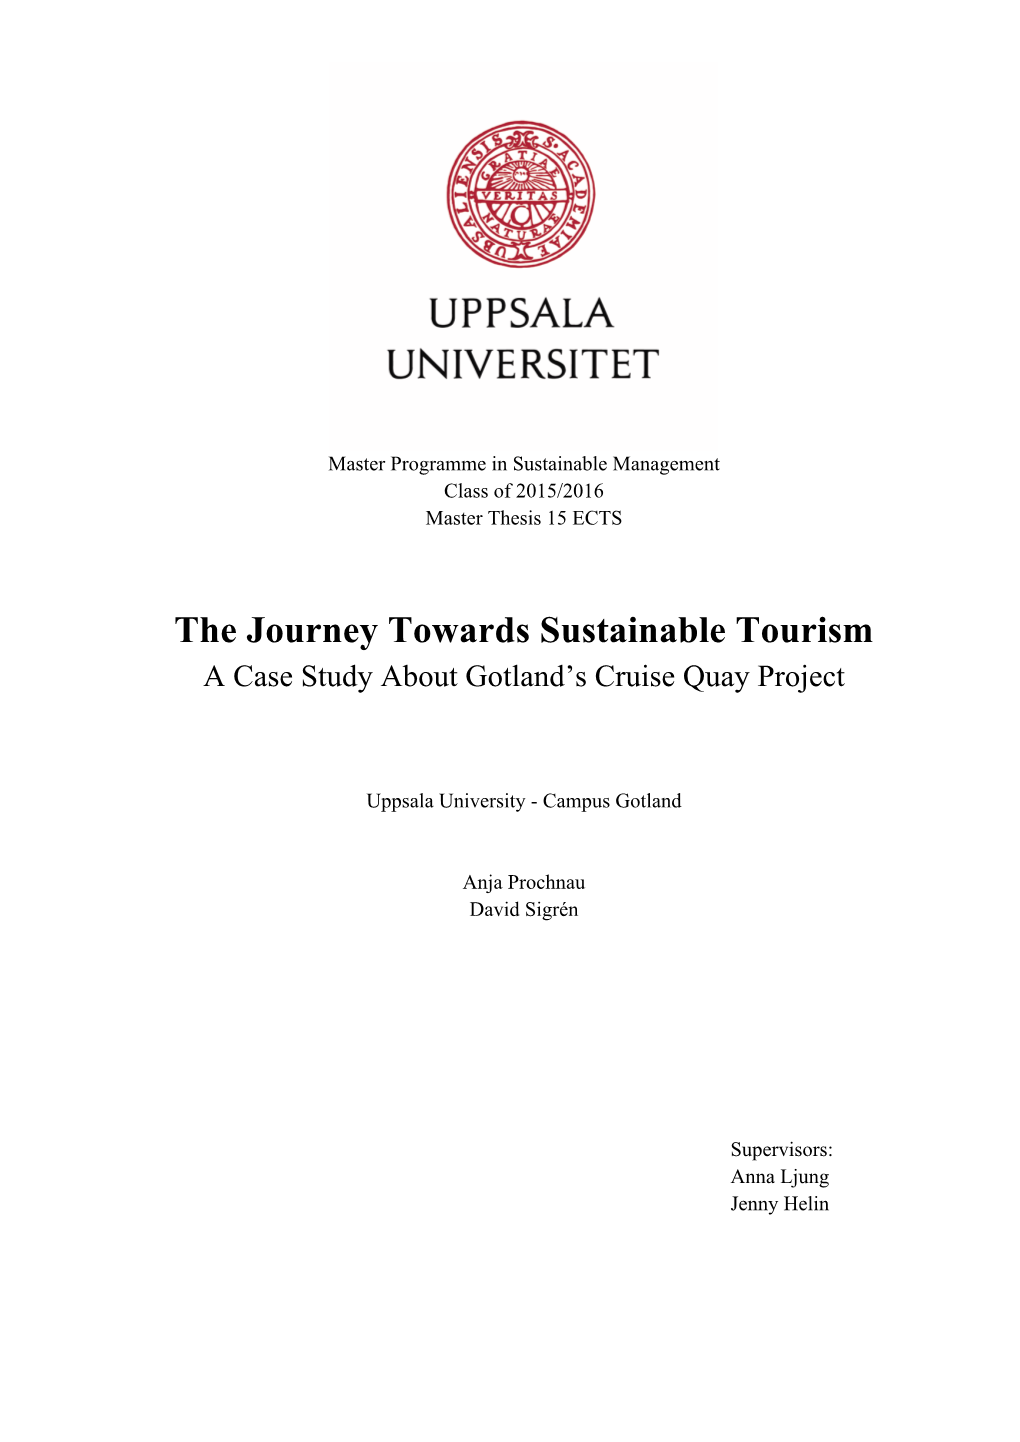 The Journey Towards Sustainable Tourism a Case Study About Gotland’S Cruise Quay Project